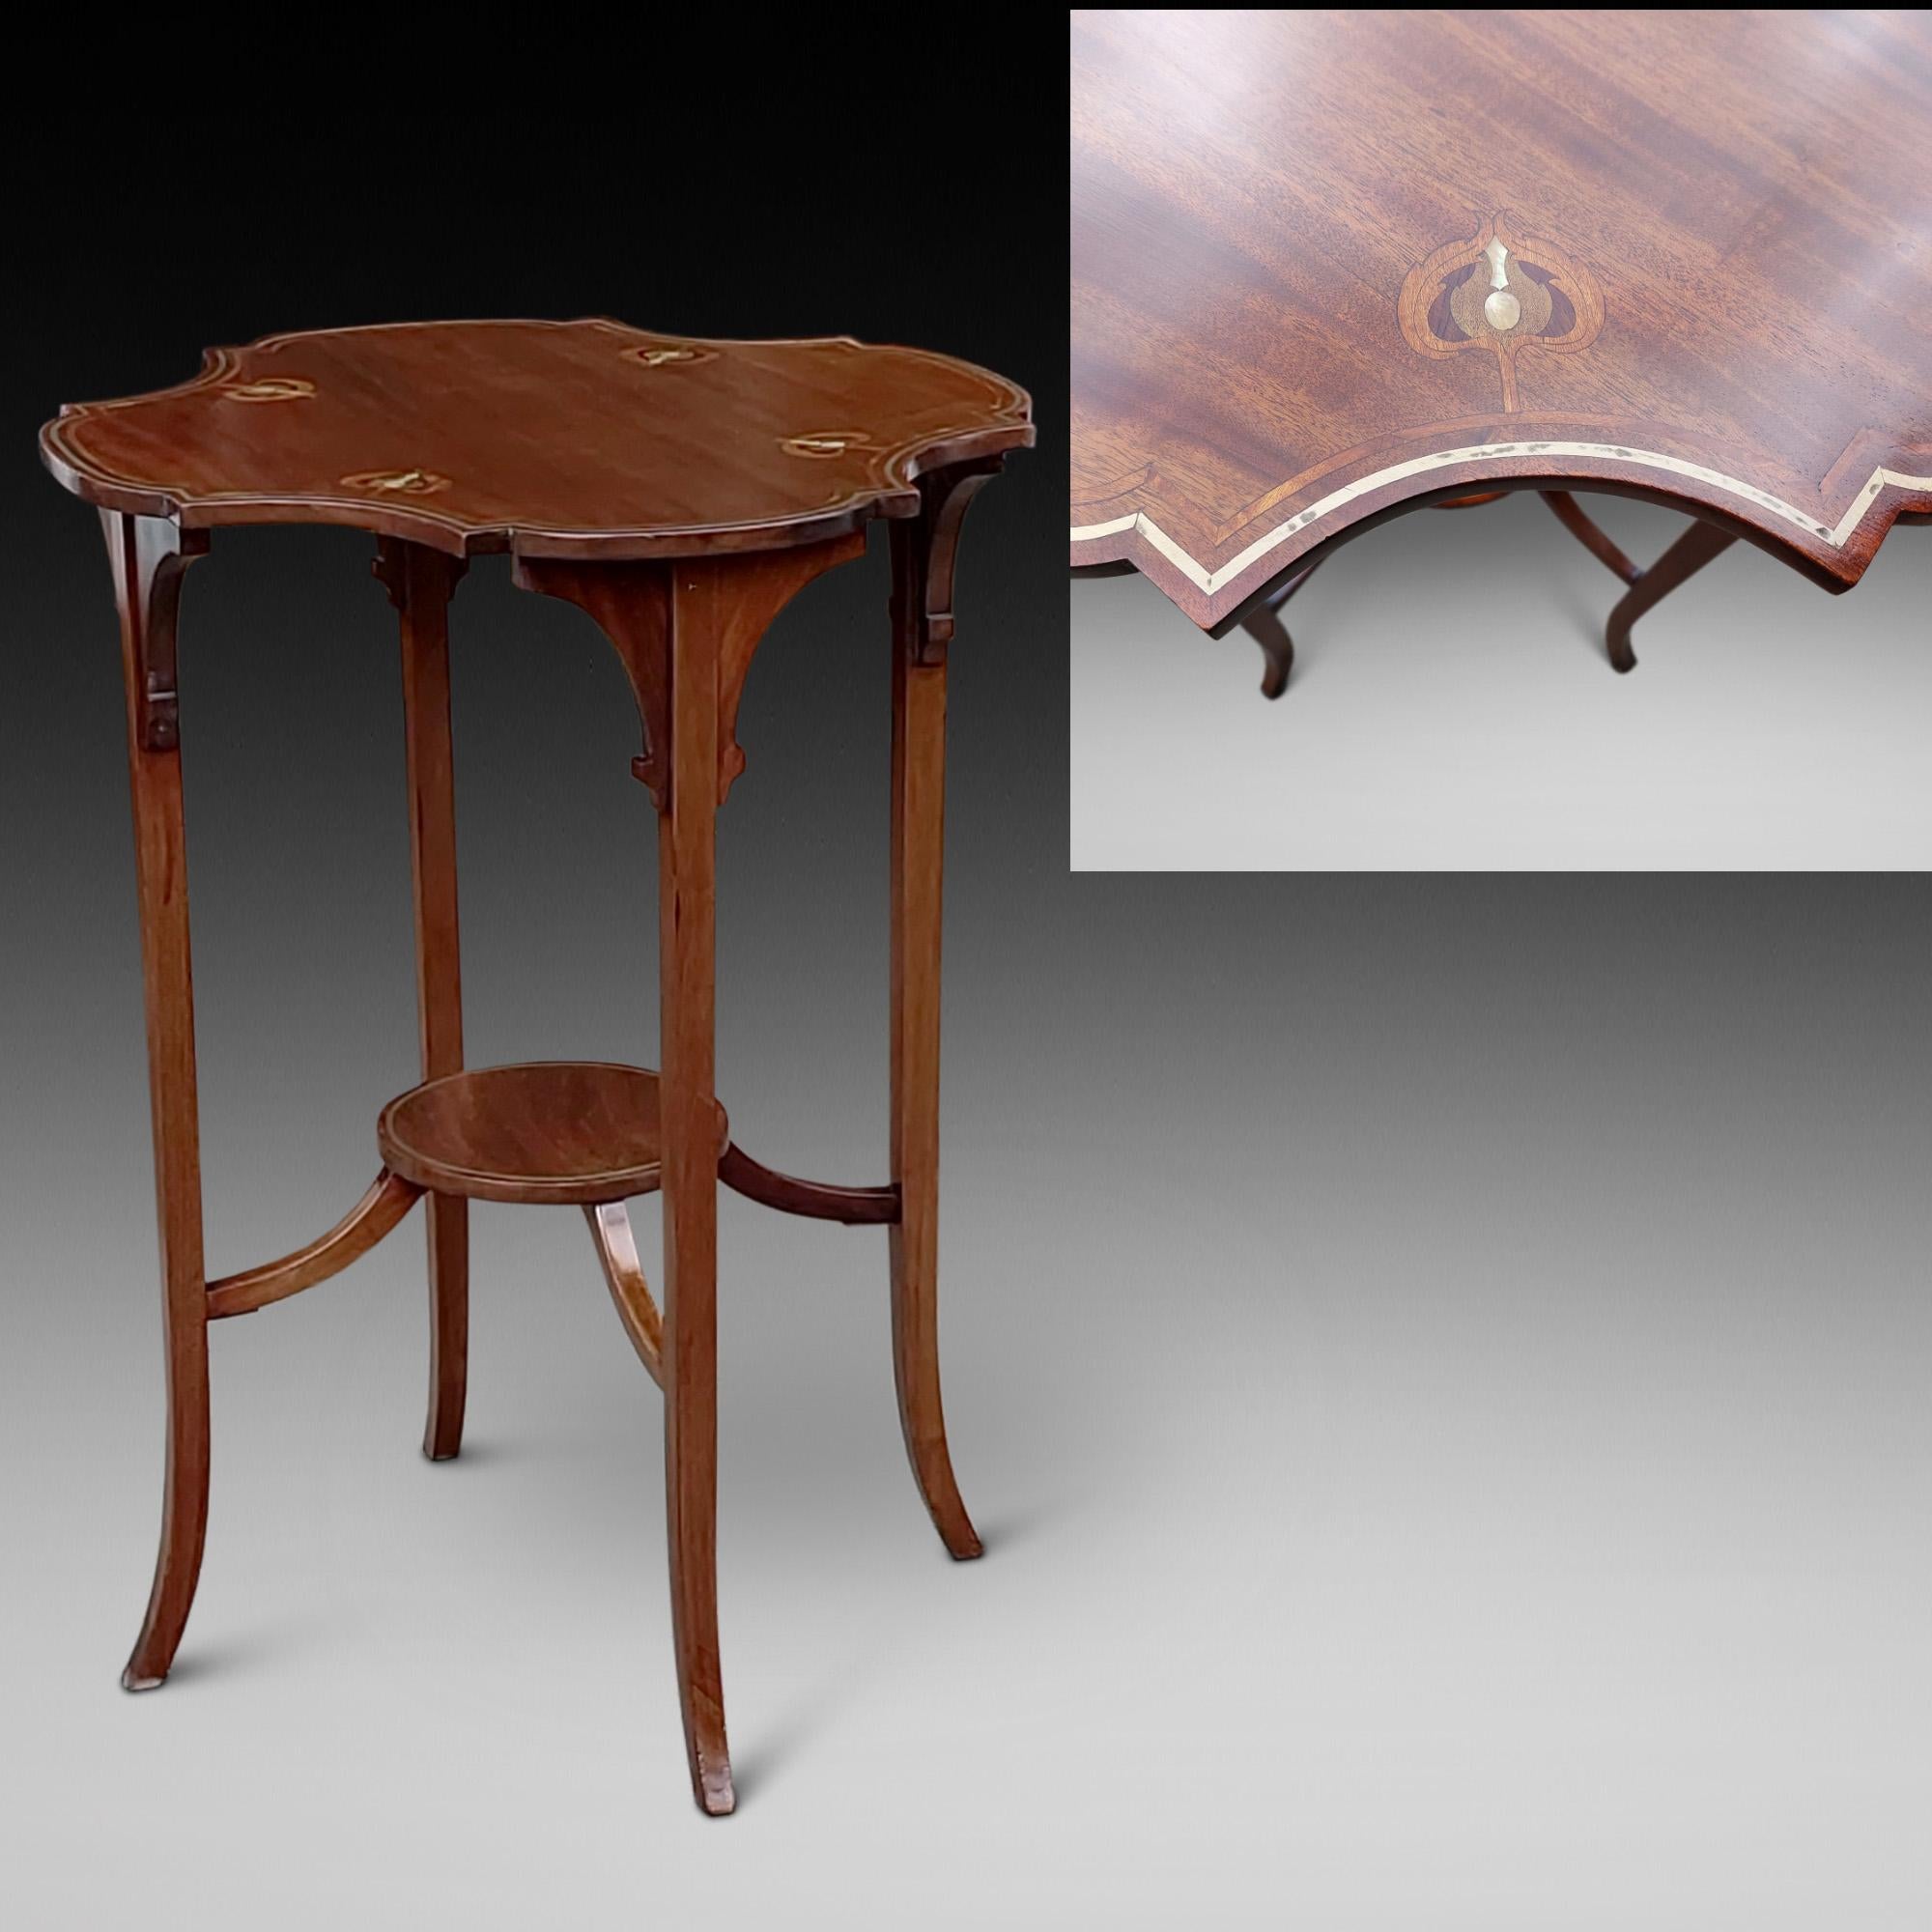 Edwardian Mahogany Art Nouveau Inlaid Occasional Table, with Marquetry and Pewter Inlay - 21